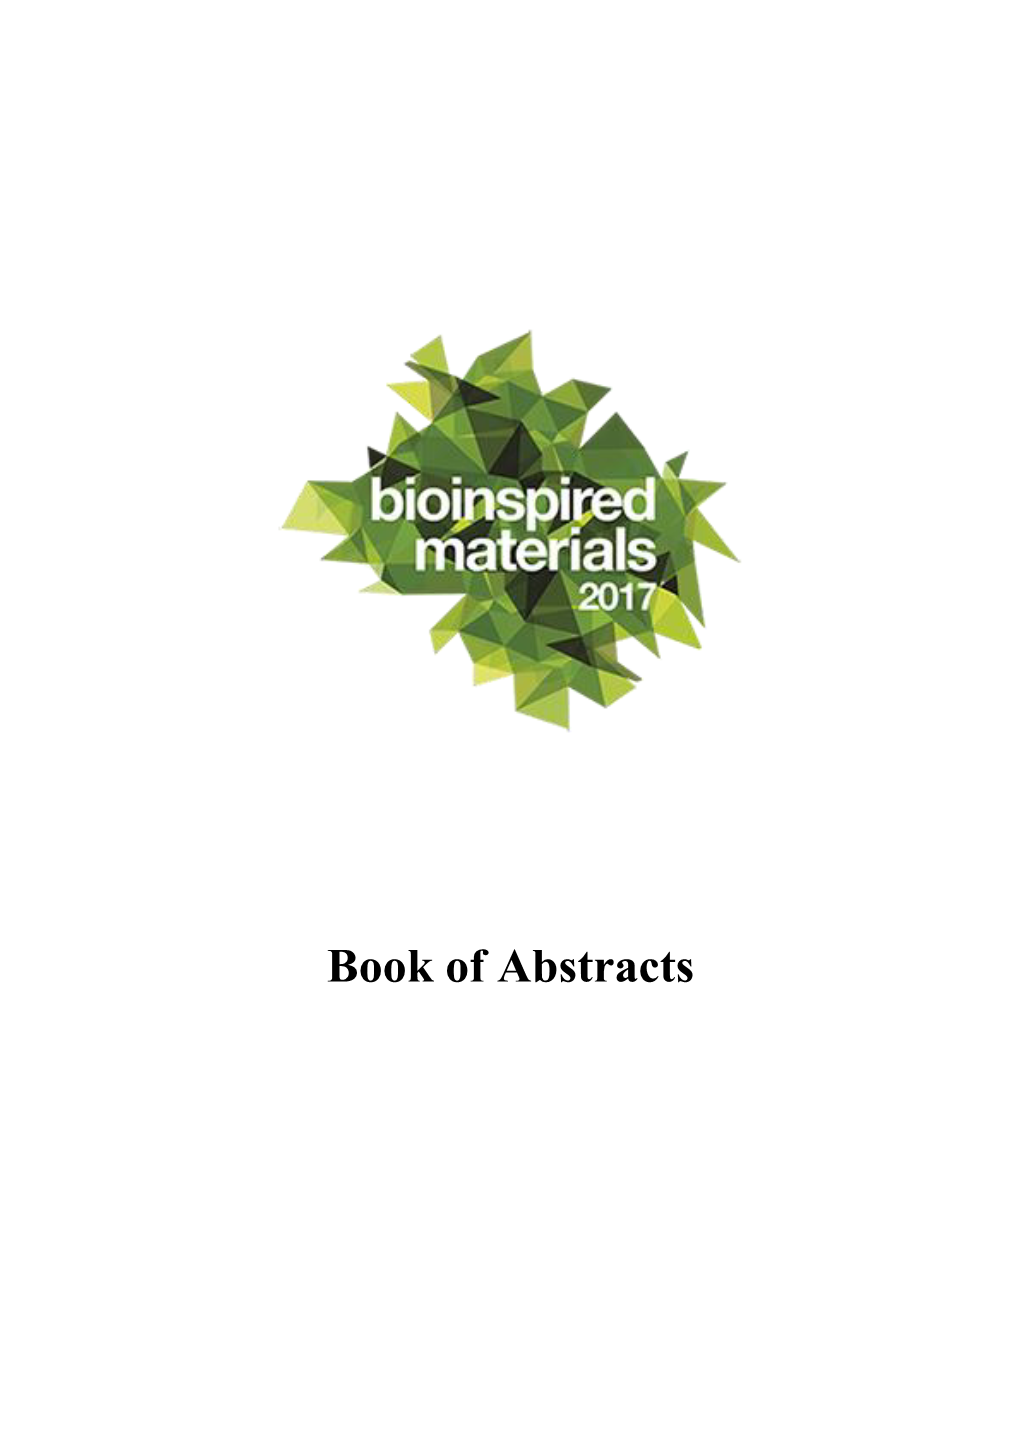 Book of Abstracts Bioinspired Materials 2017 Conference